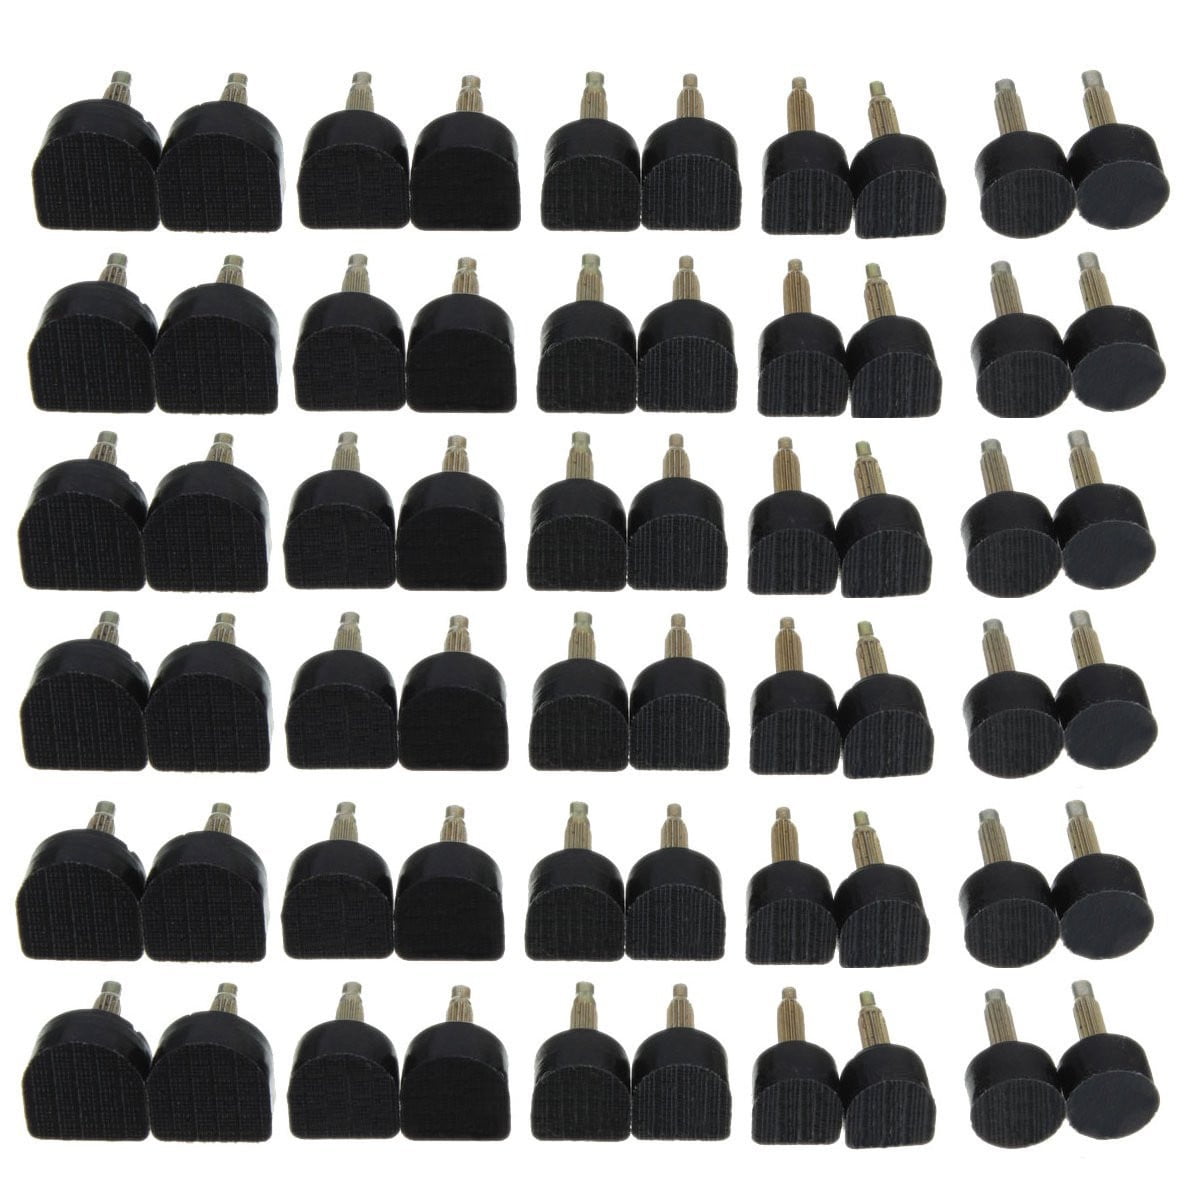 60PCS High Heel Replacement Tips High Heel Shoe Repair Tips Stiletto Repair Heel Caps Kit Pin Taps Dowel Lifts Replacement Black 5 Sizes by Meiso 